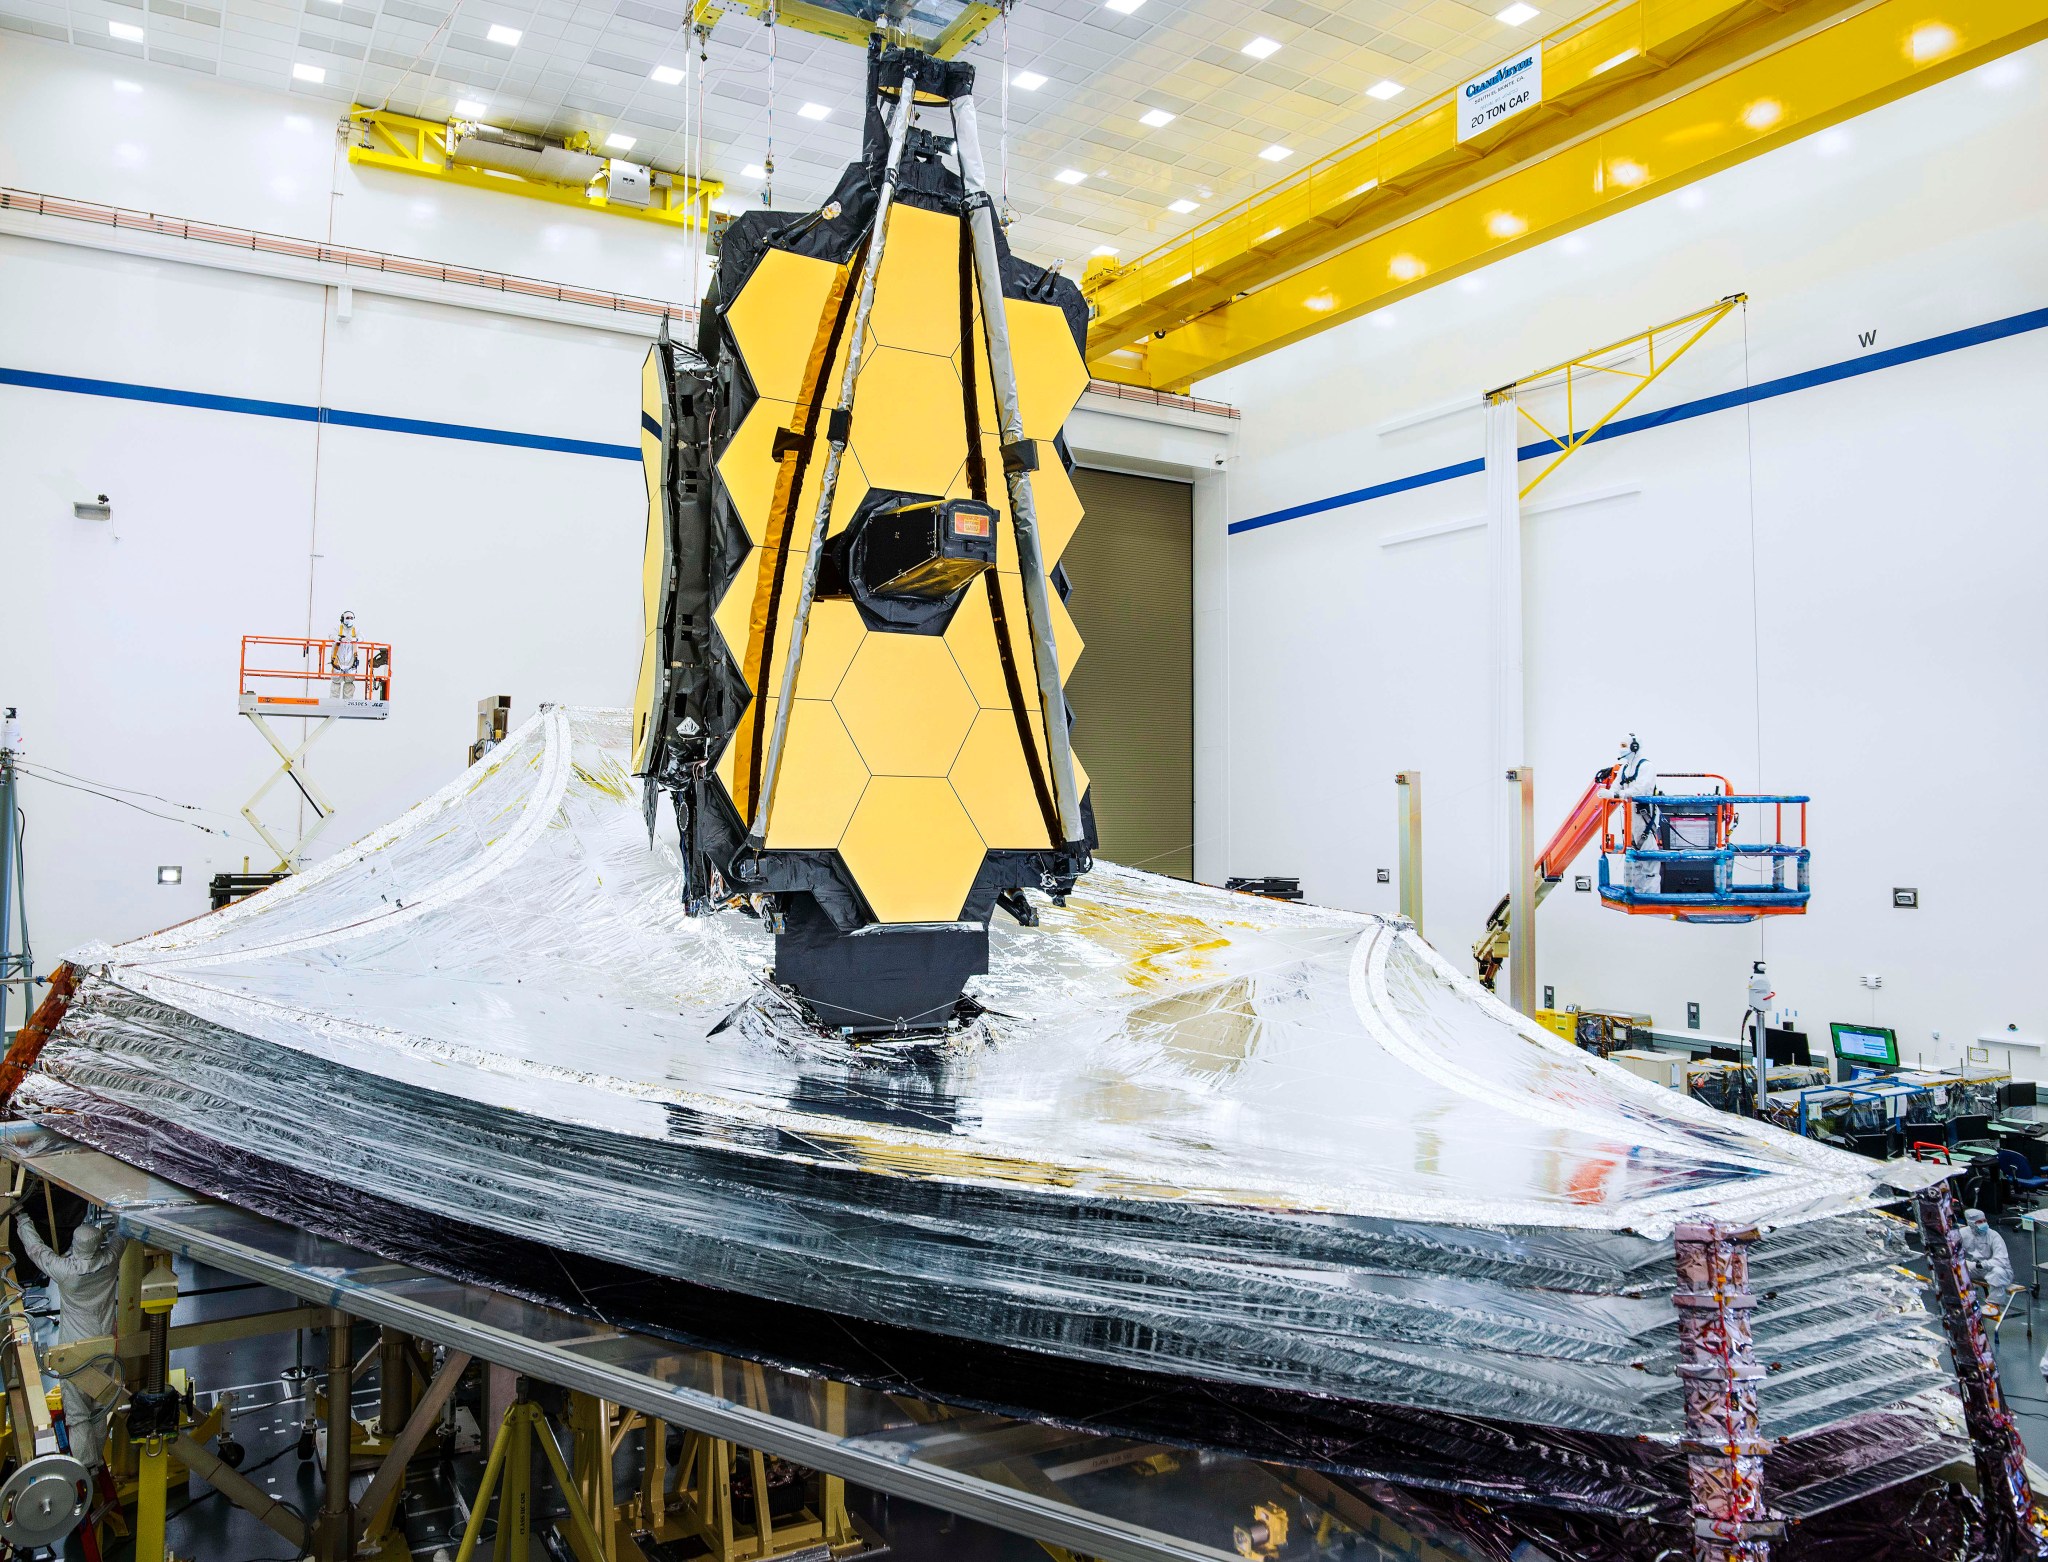 The James Webb Space Telescope being worked on at NASA